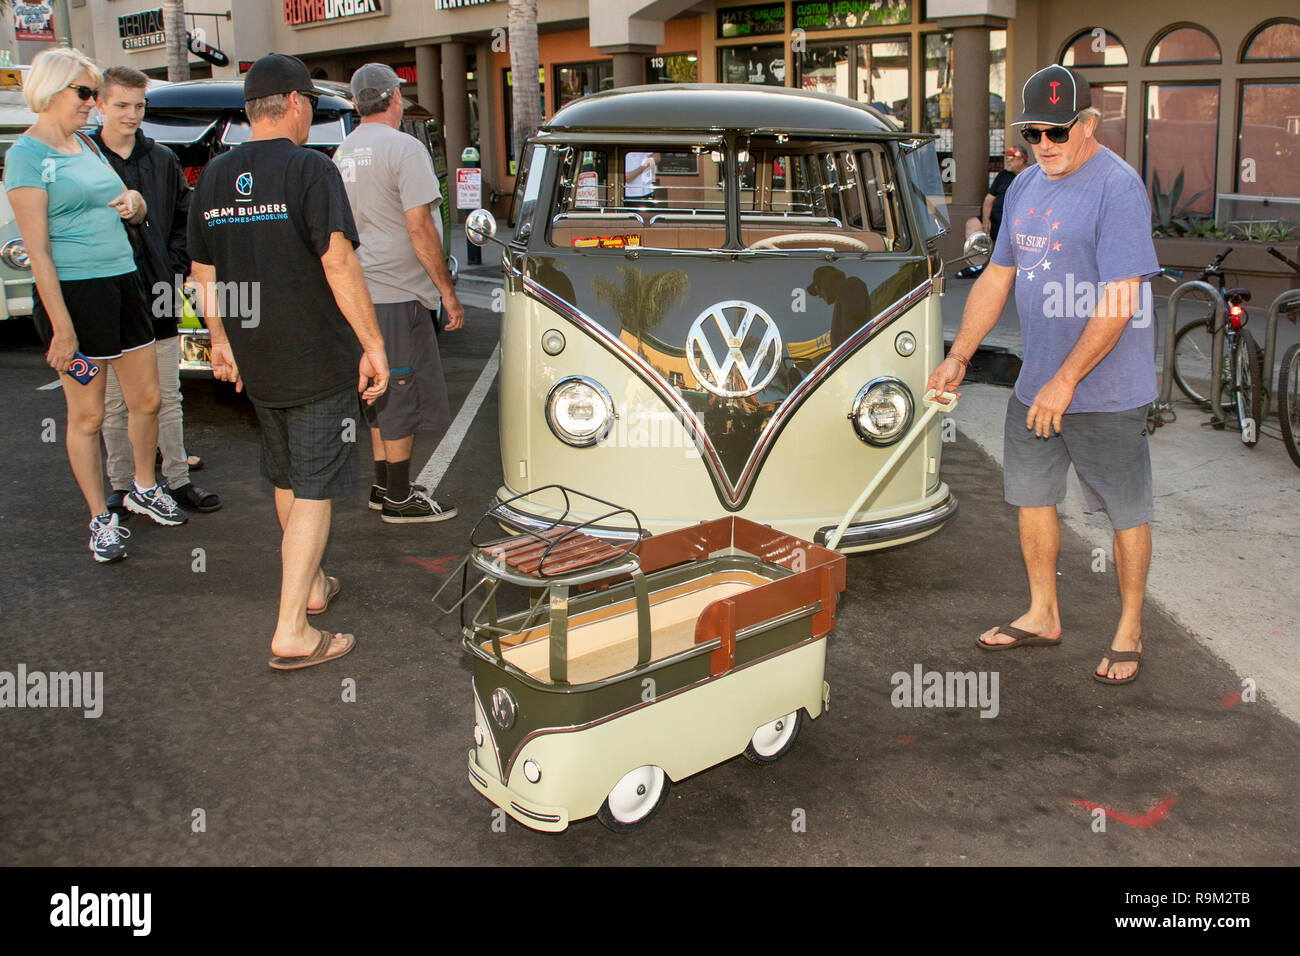 The owner of a classic 1961 Volkswagen van shows off a junior-size mascot in the form of a wagon replica of his vehicle at an antique car show in Huntington Beach, CA. Stock Photo